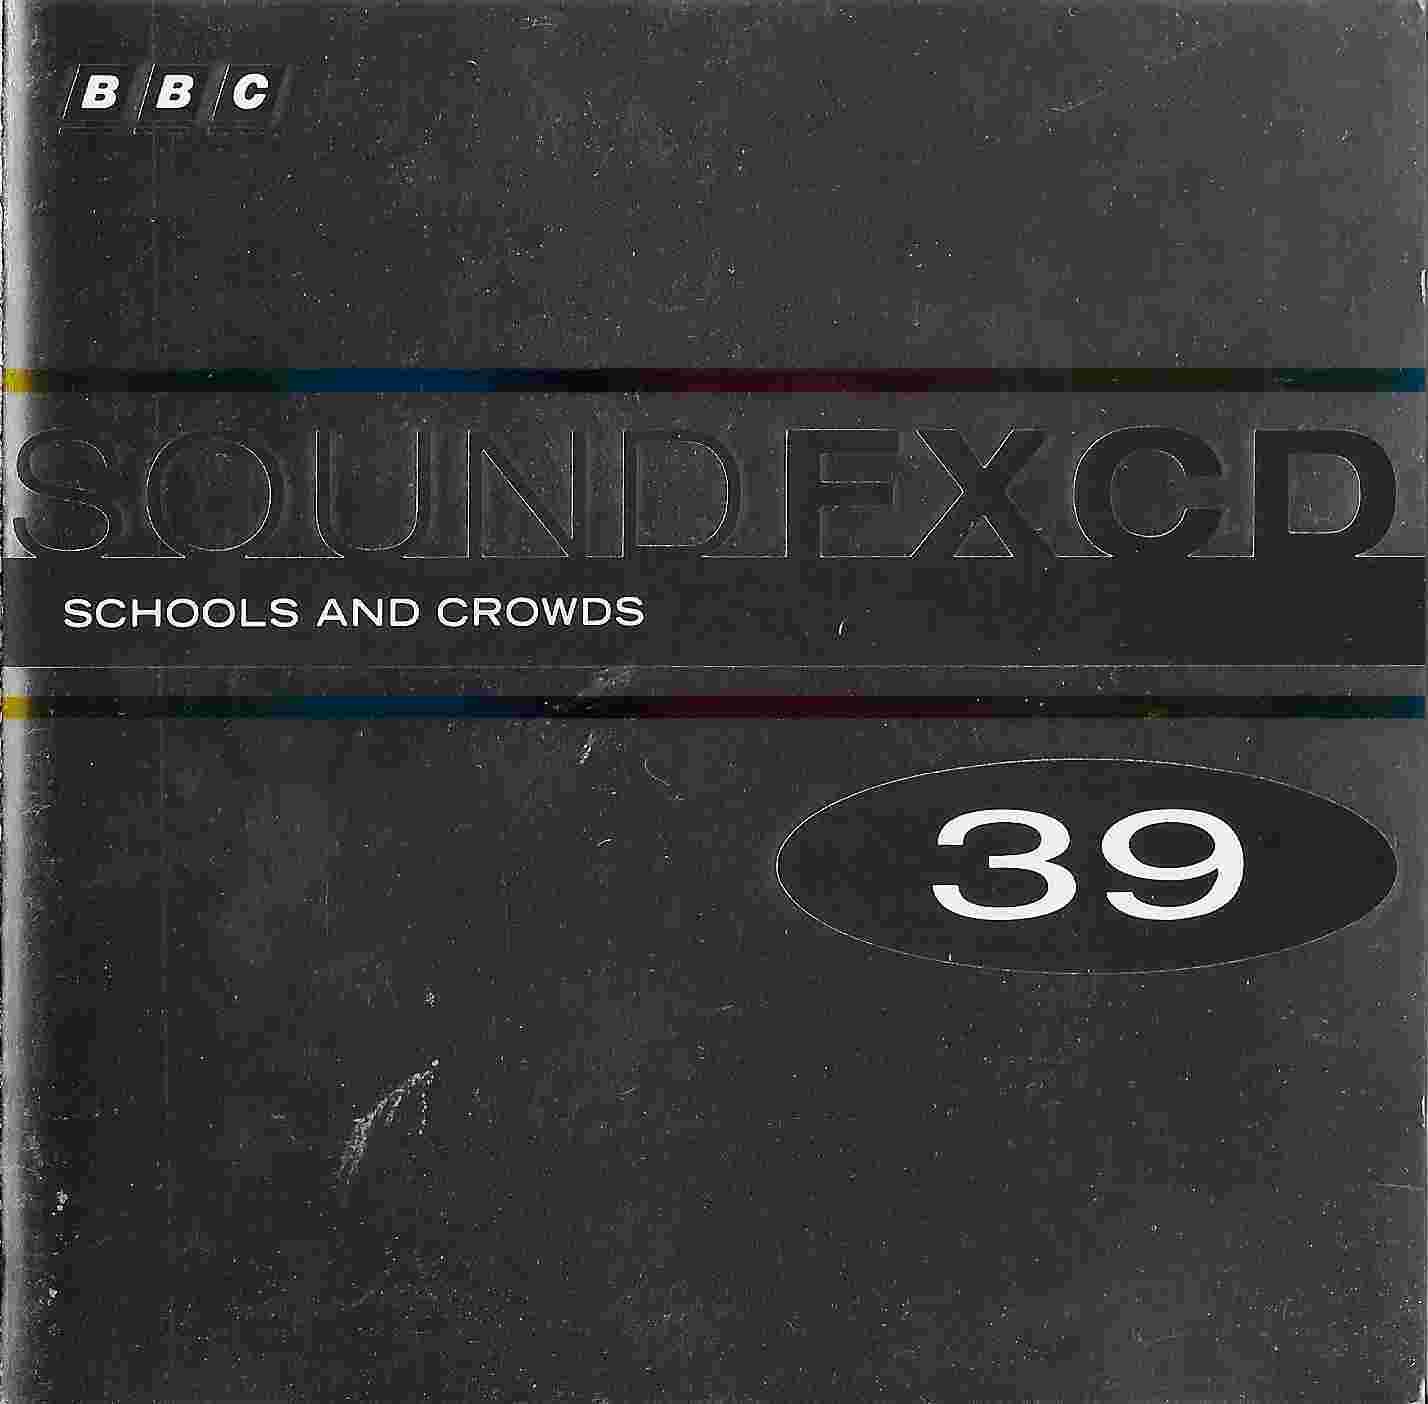 Picture of BBCCD SFX039 Schools and crowds by artist Various from the BBC cds - Records and Tapes library